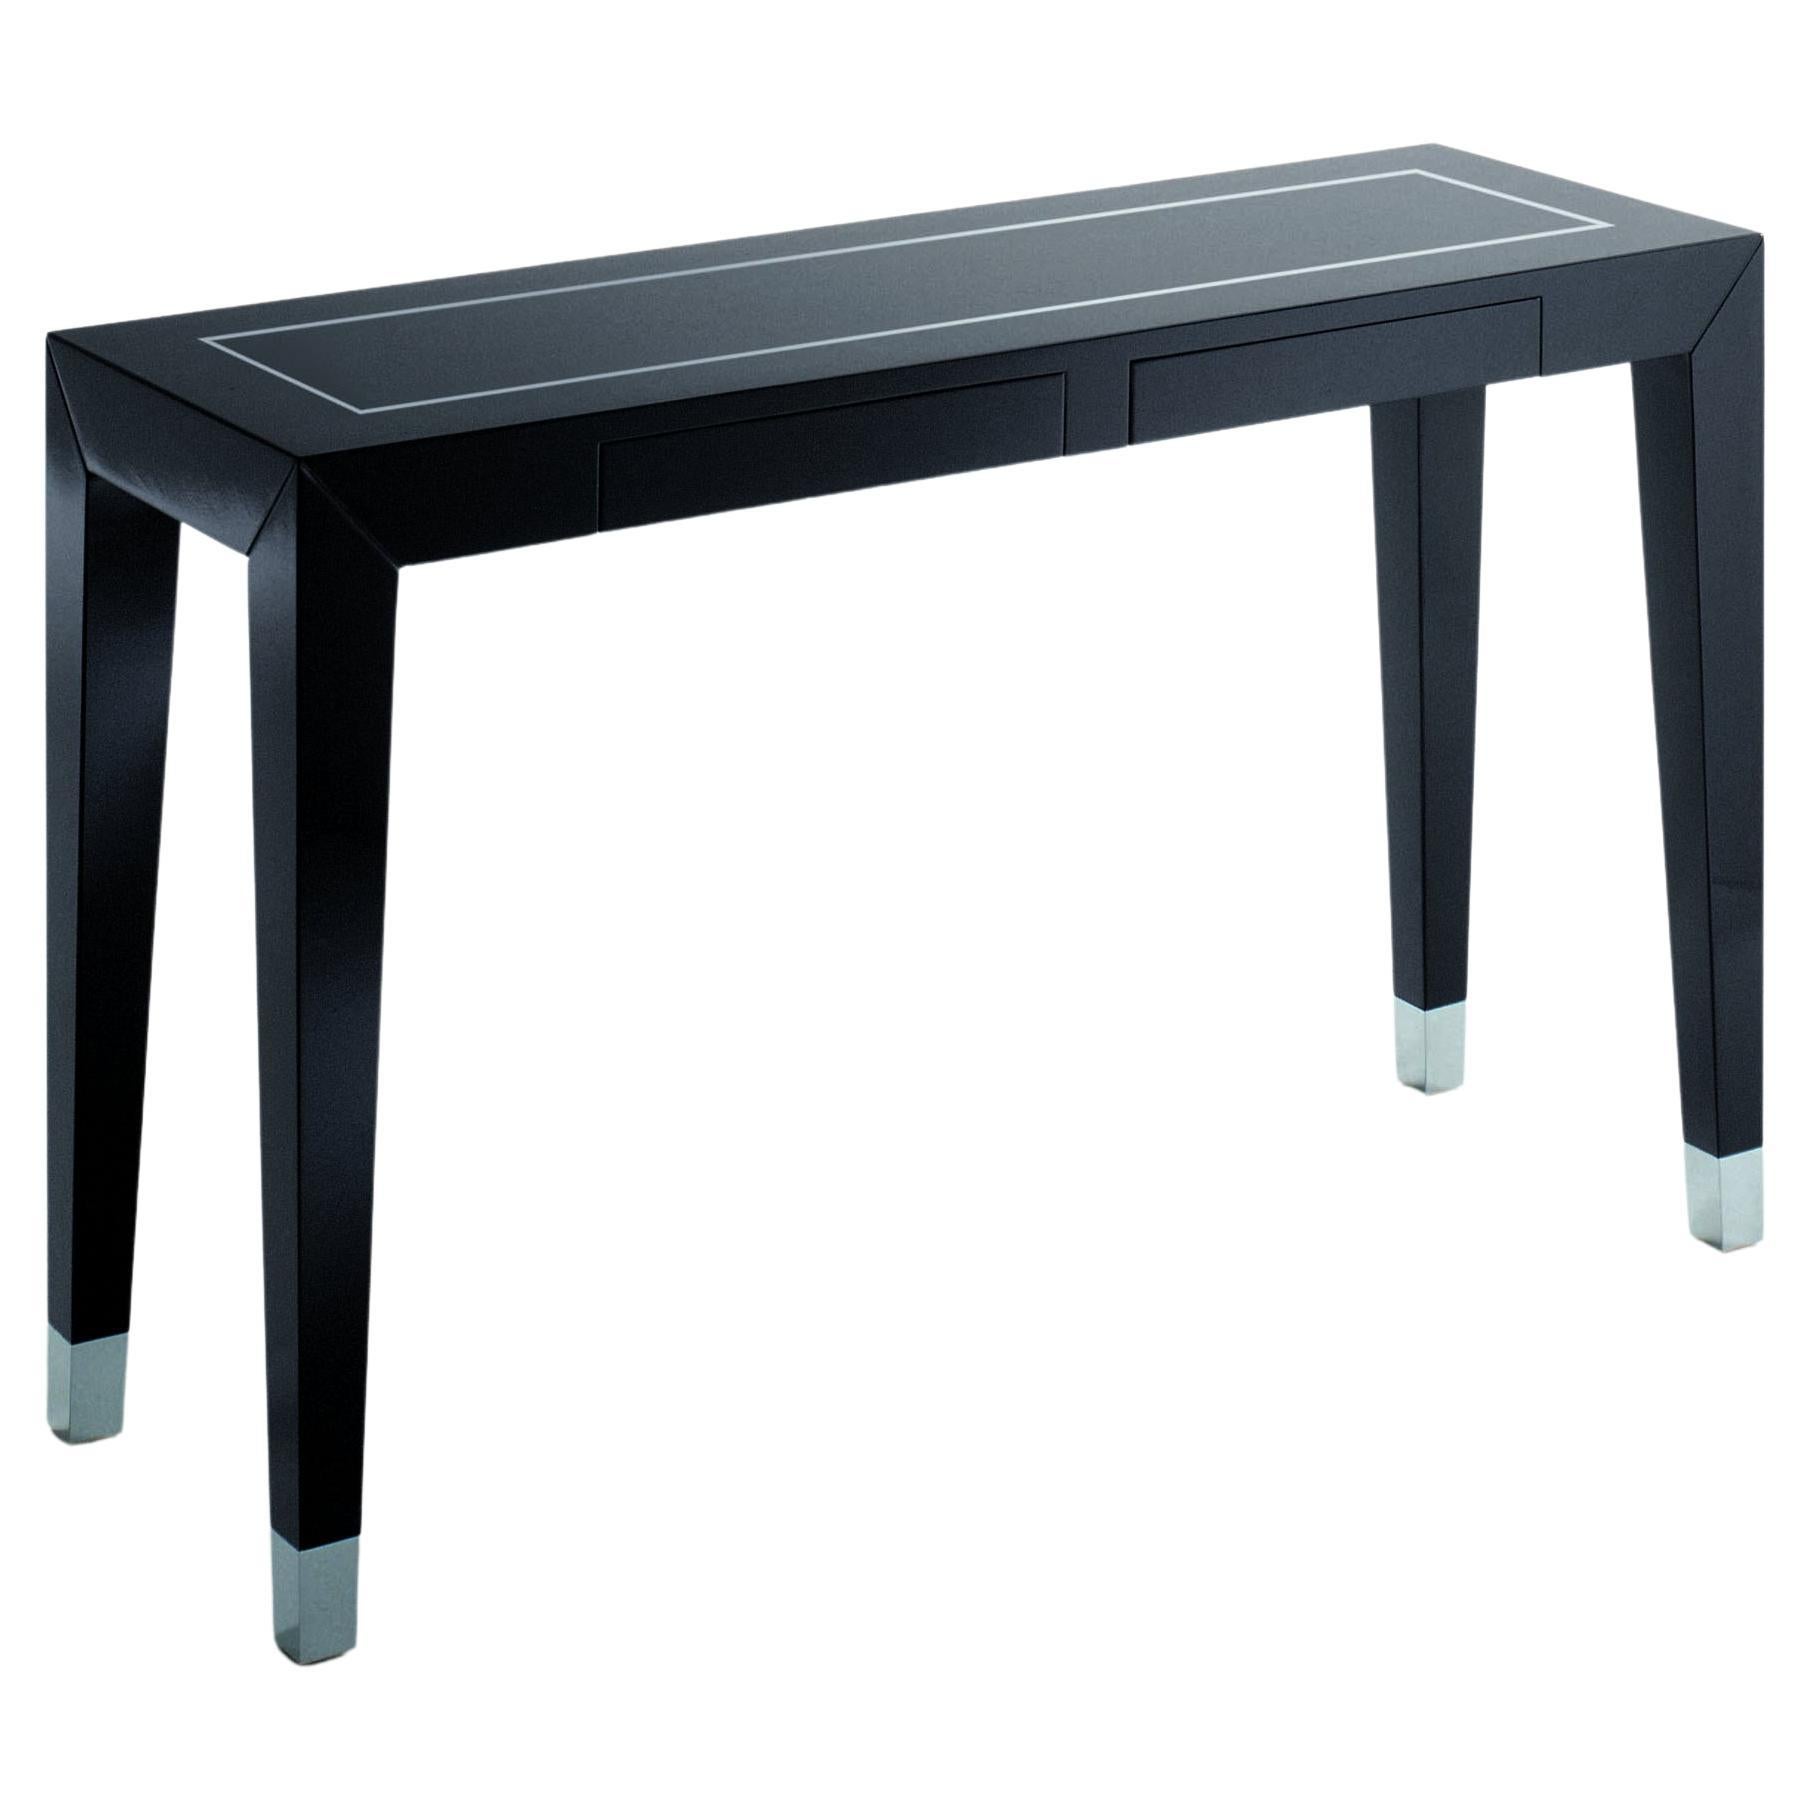 Limited, Orsi, Orson Console, High Gloss Lacquered Black Finish For Sale